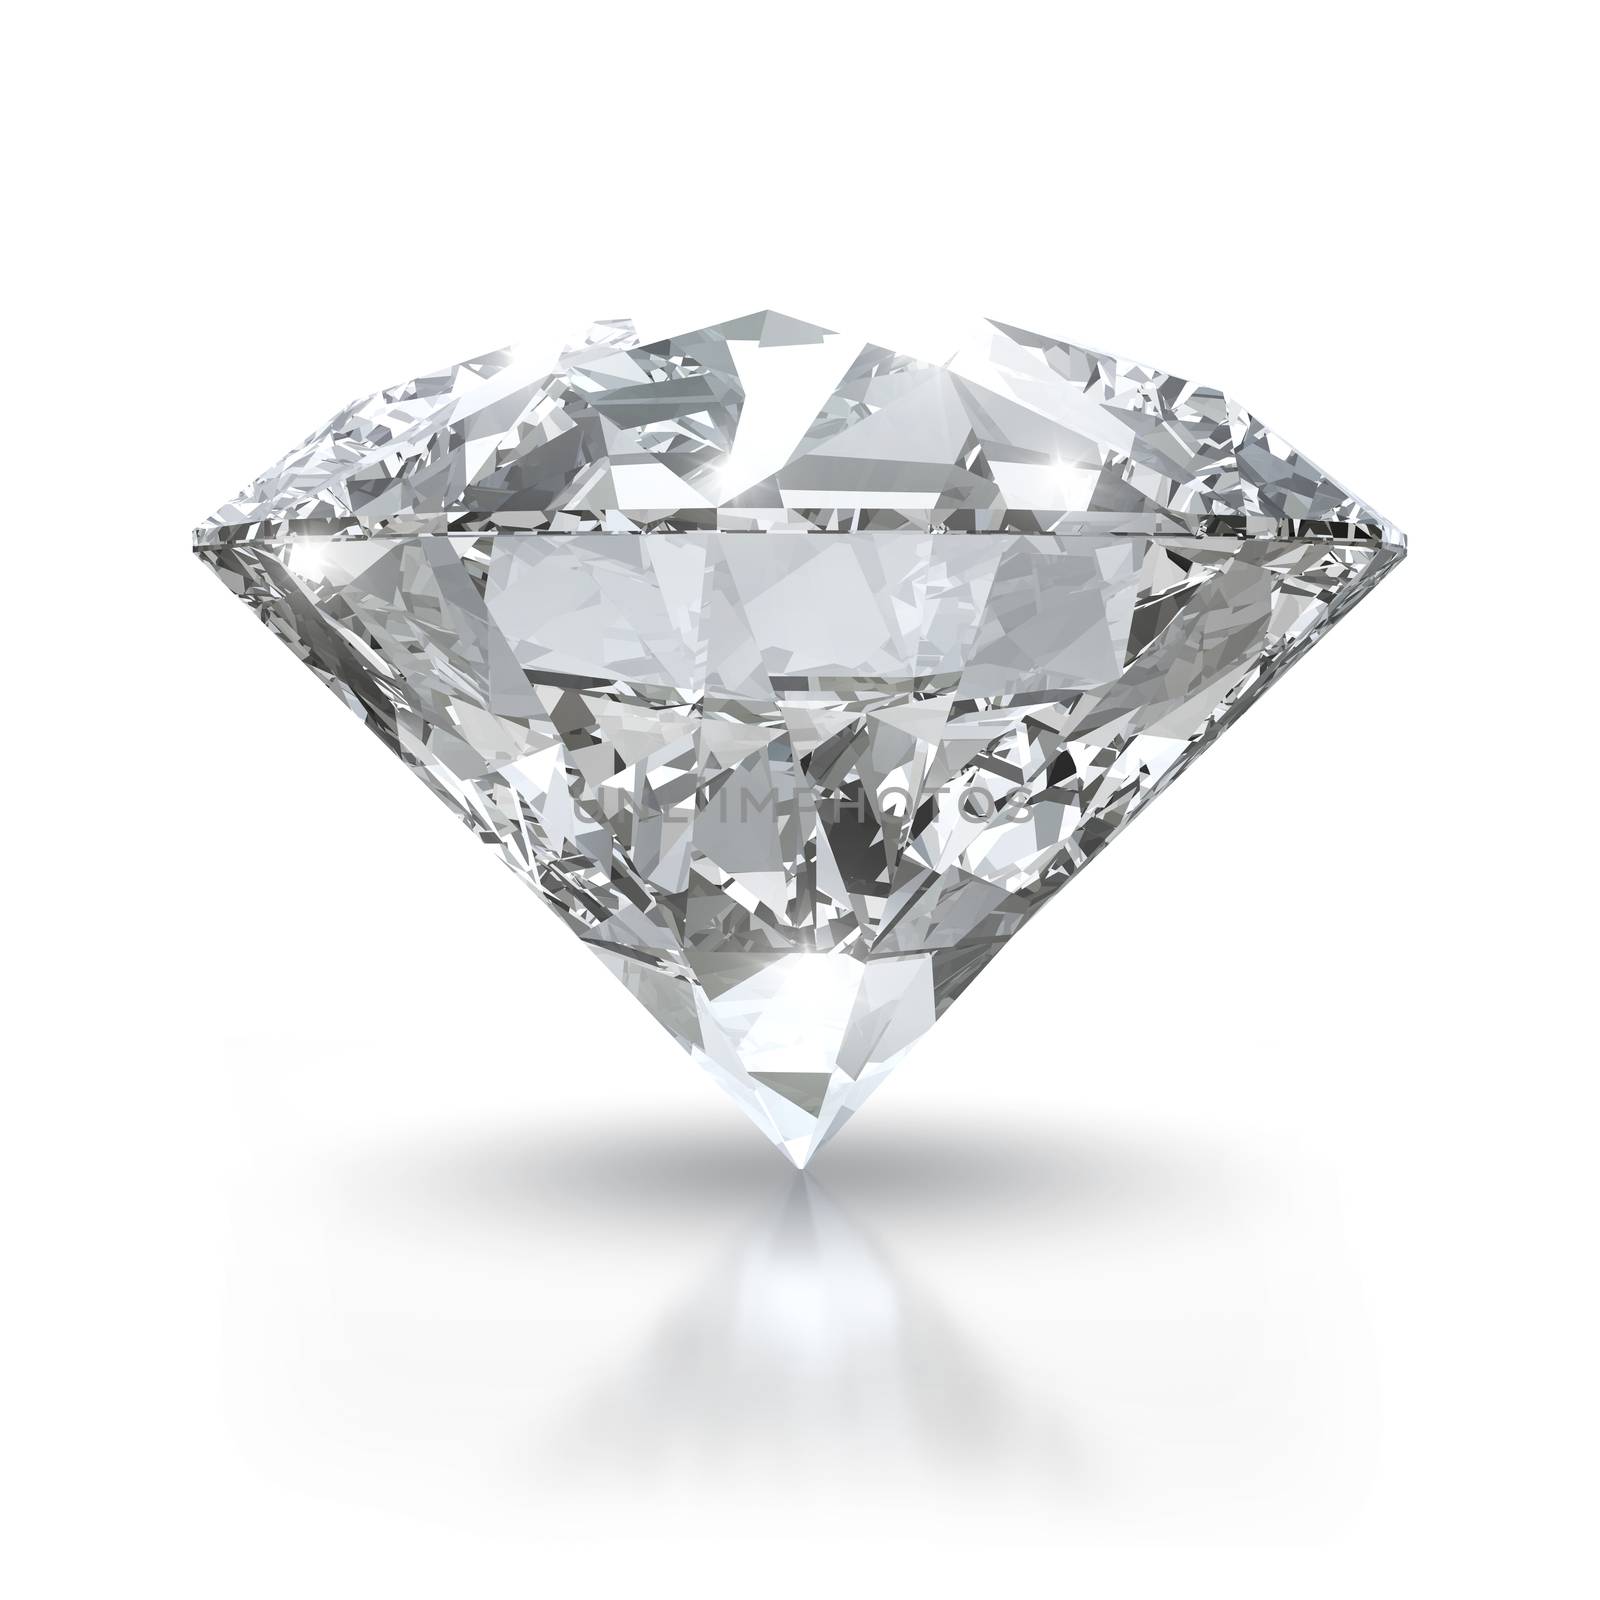 Luxury diamond isolated on white background with clipping path
